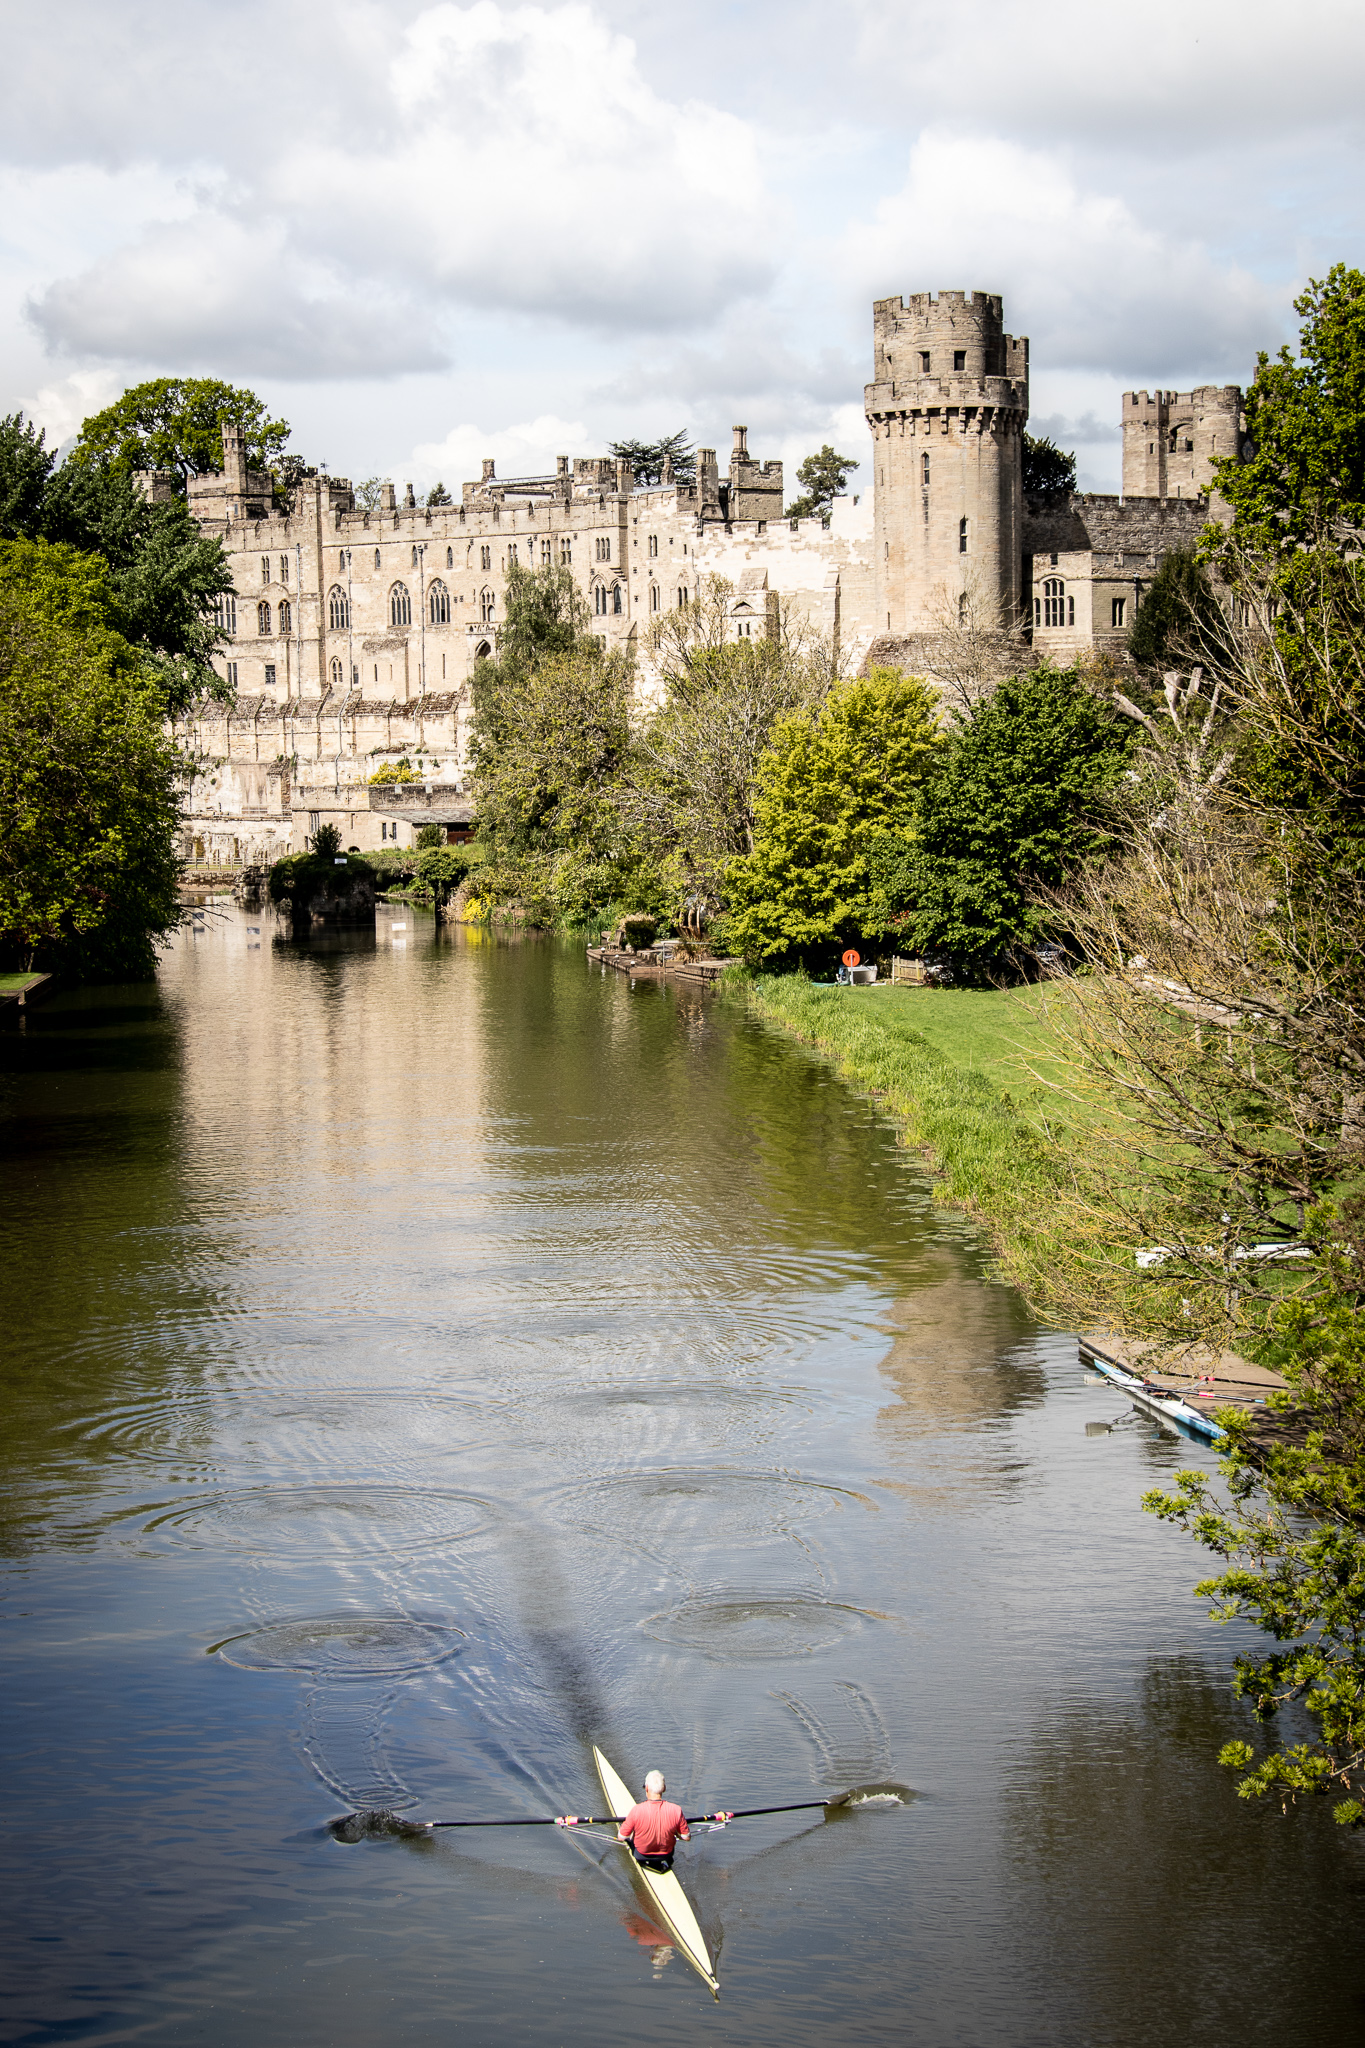 A view of Warwick Castle from Castle Bridge on the River Avon. A man is rowing down the River Avon and ripples show his path down the river. 